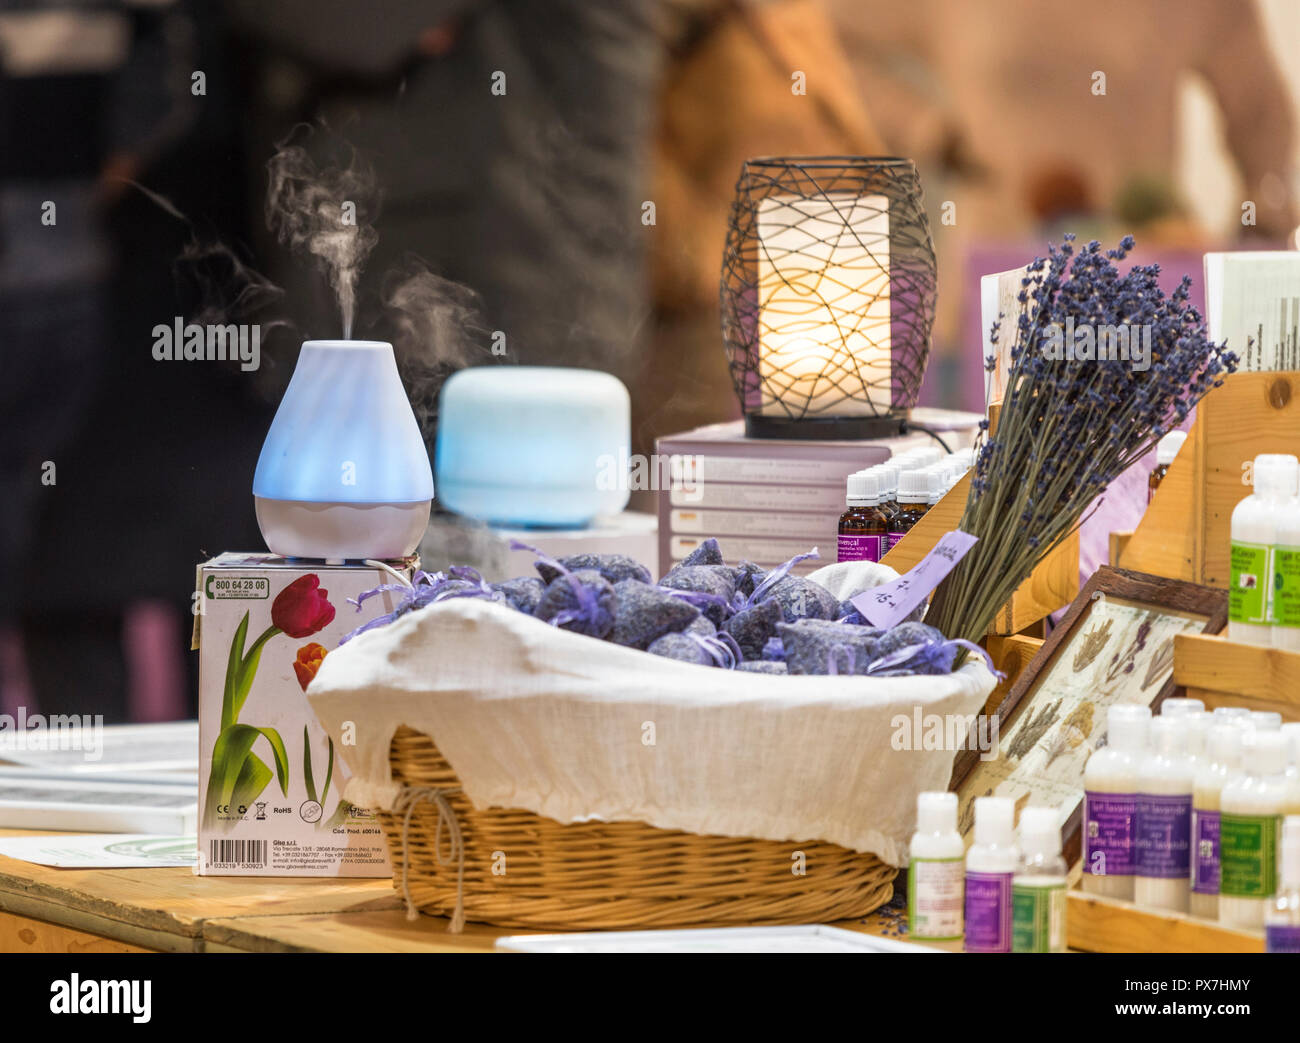 https://c8.alamy.com/comp/PX7HMY/various-houseware-on-sale-at-fiera-milano-PX7HMY.jpg